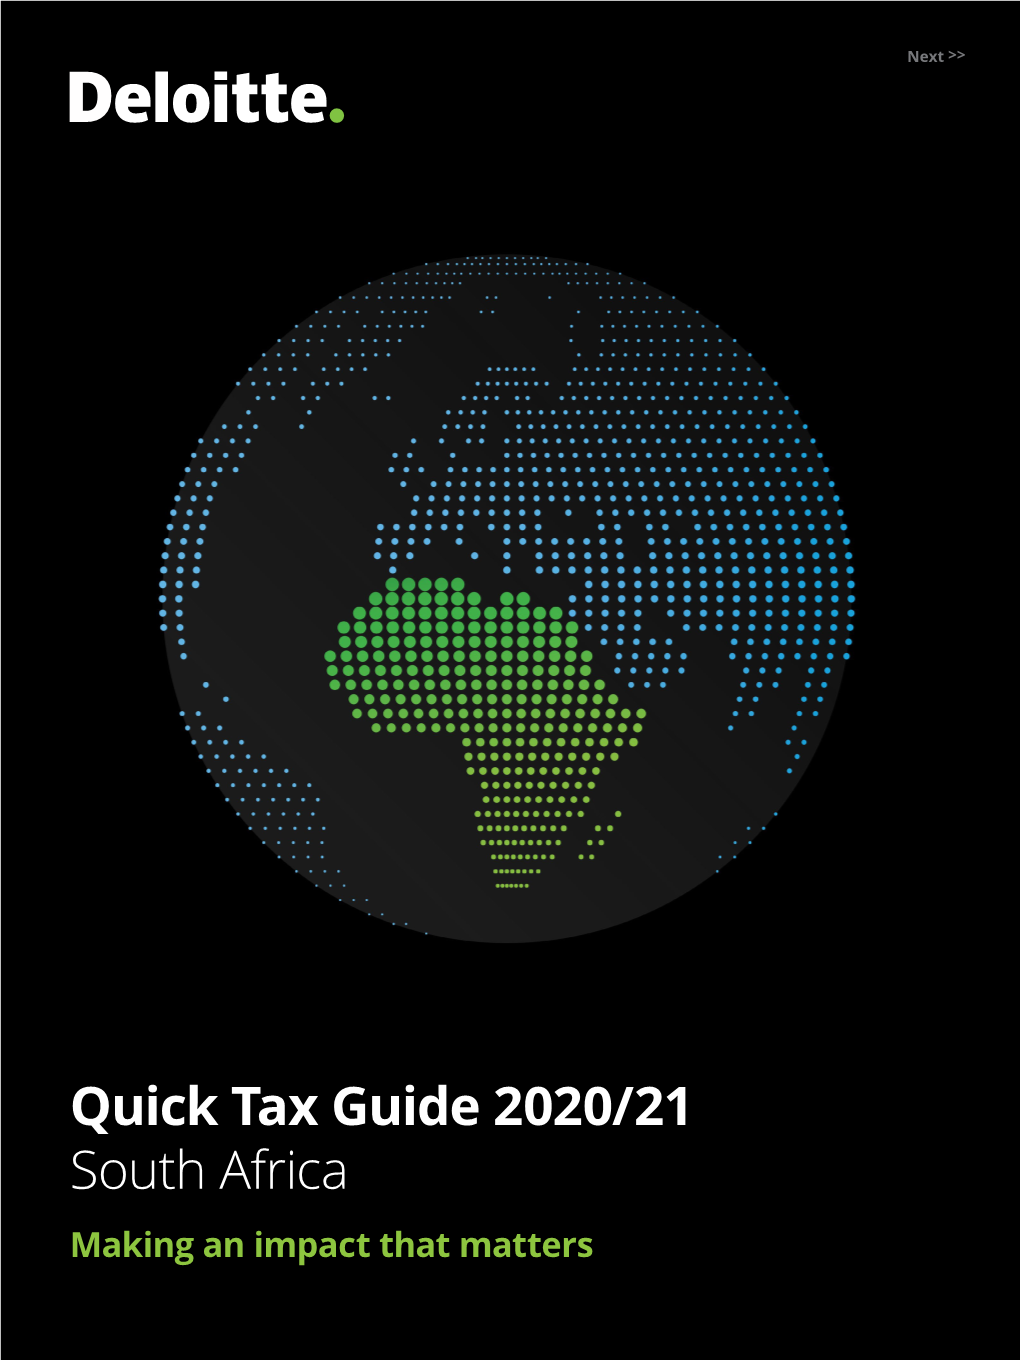 Quick Tax Guide 2020/21 South Africa